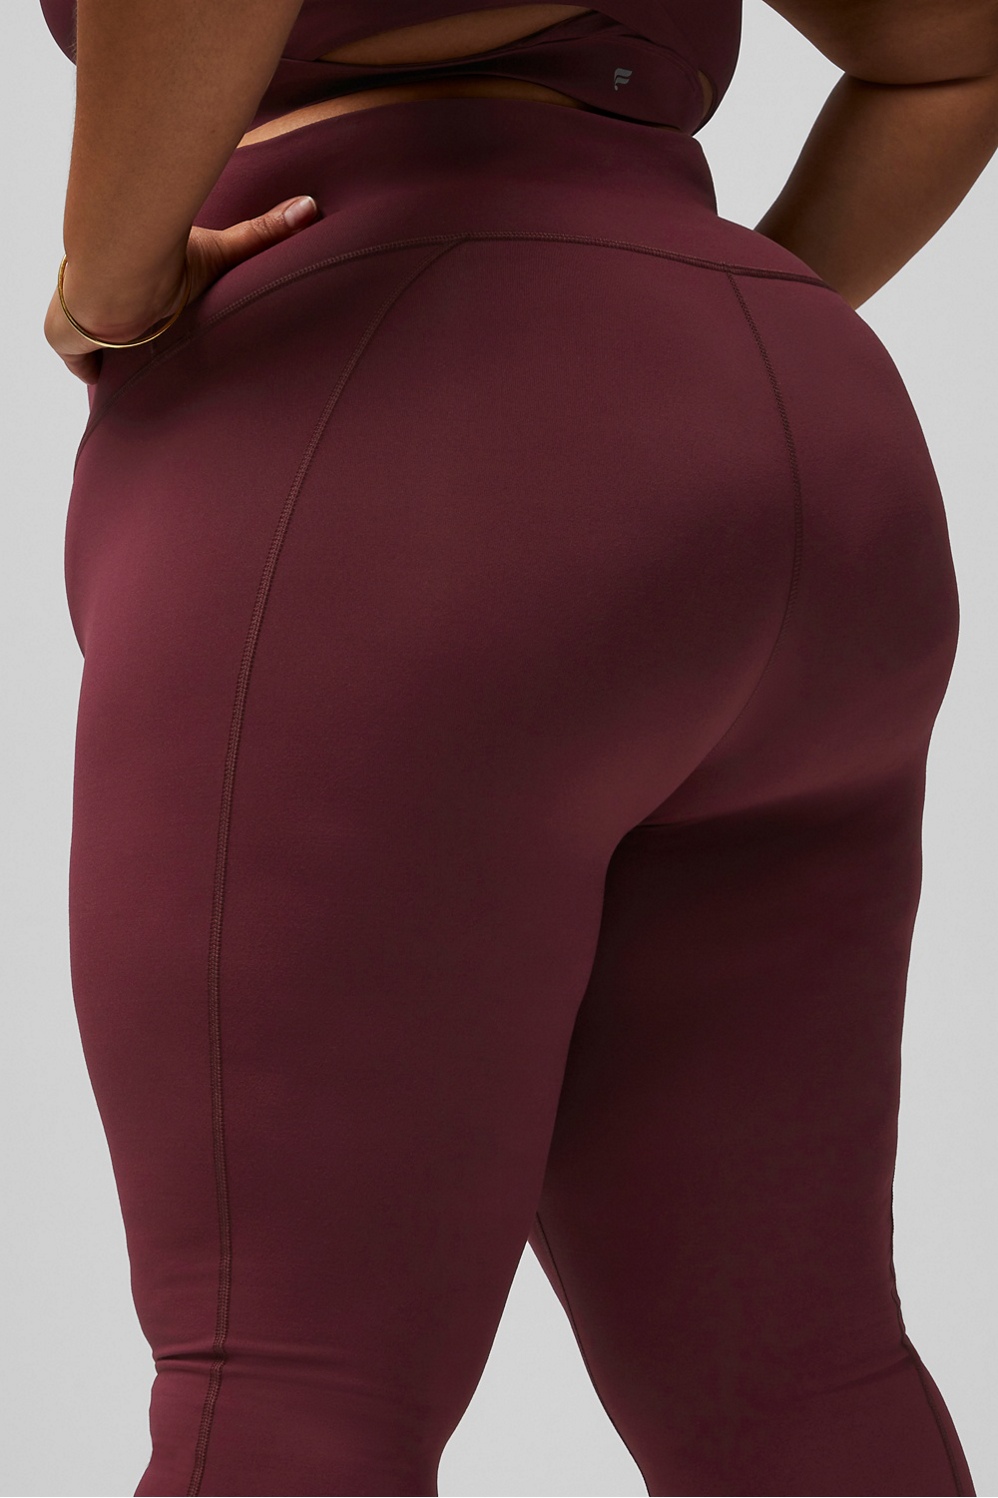 Fabletics Solid Maroon Burgundy Leggings Size XS - 62% off